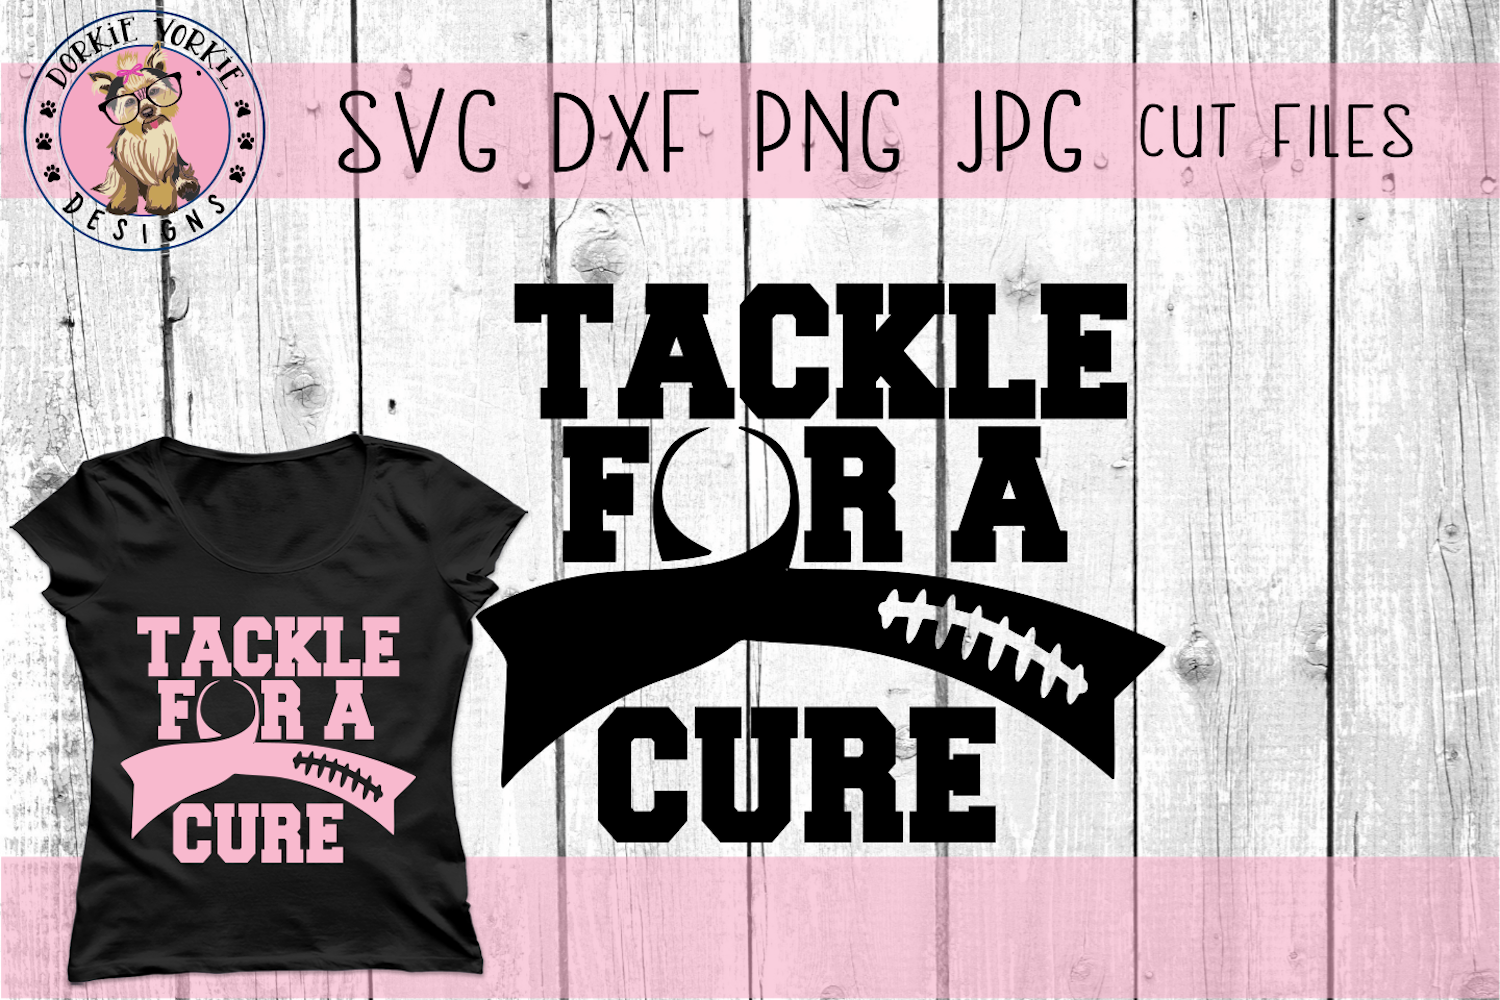 Tackle for a cure - Awareness, Football, Cancer - SVG Cut example image 1.